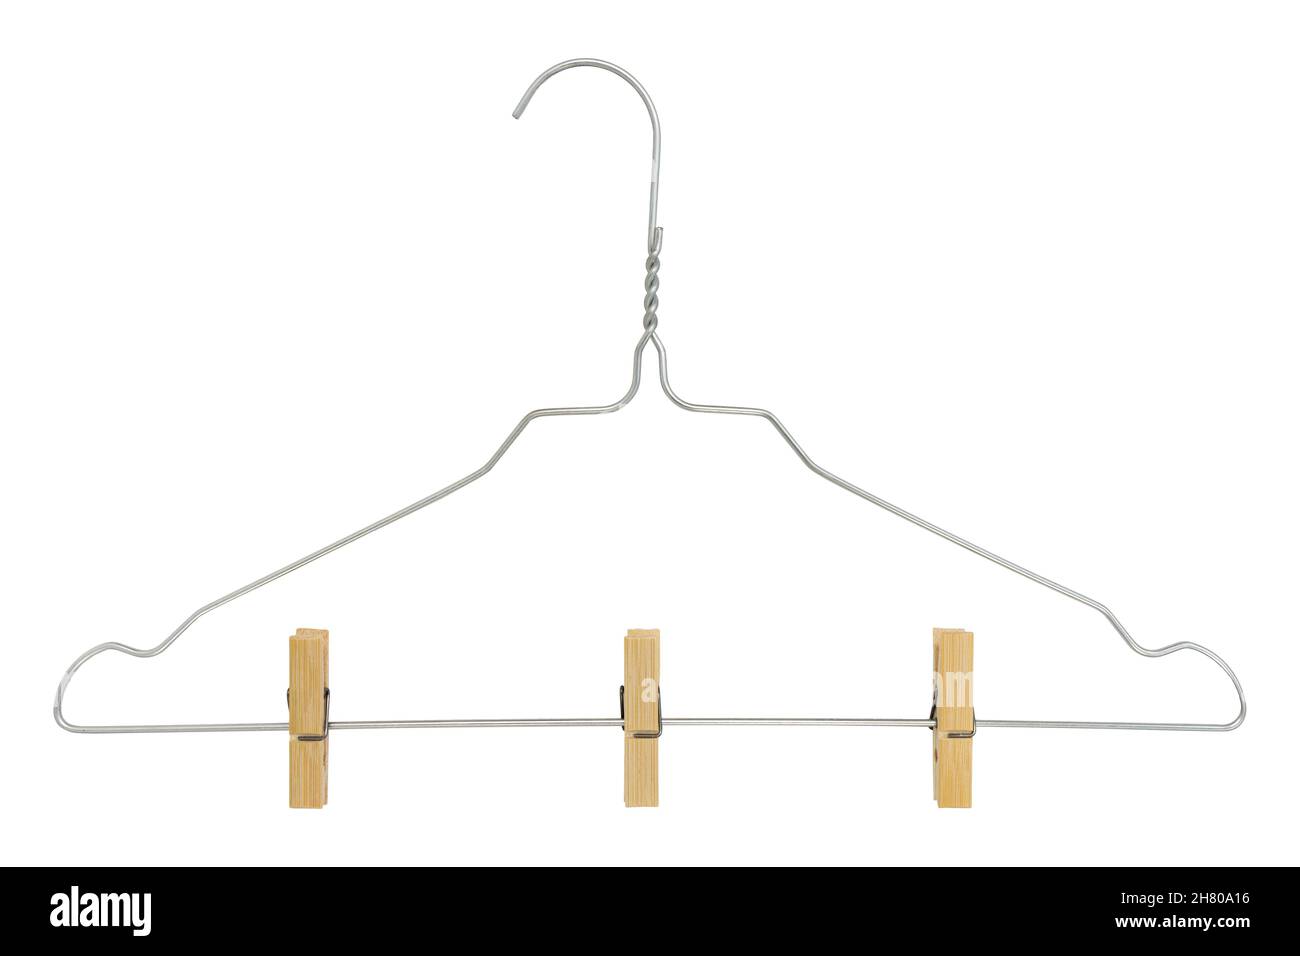 metal coat hanger with clothespins isolated on white background, clothes pegs clamped to hanger Stock Photo